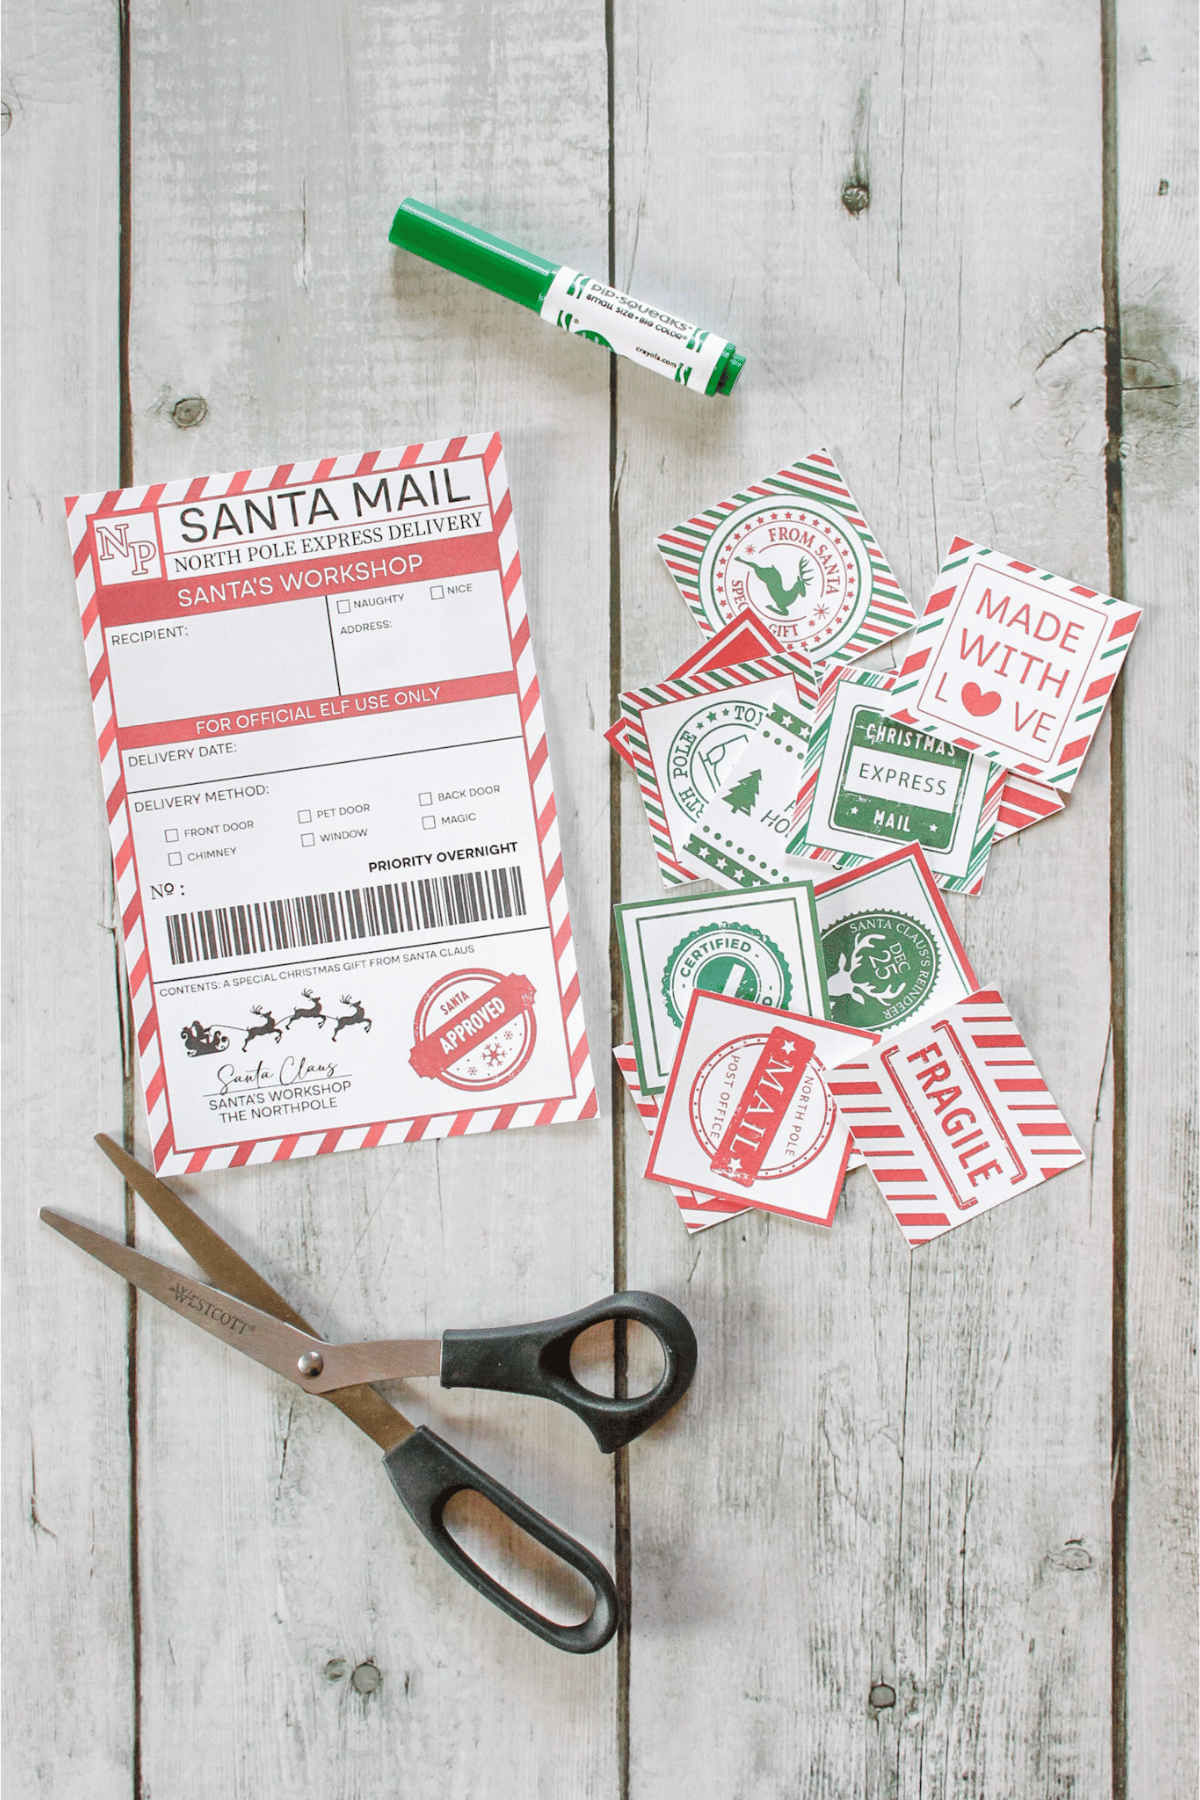 Printable label and stickers cut out